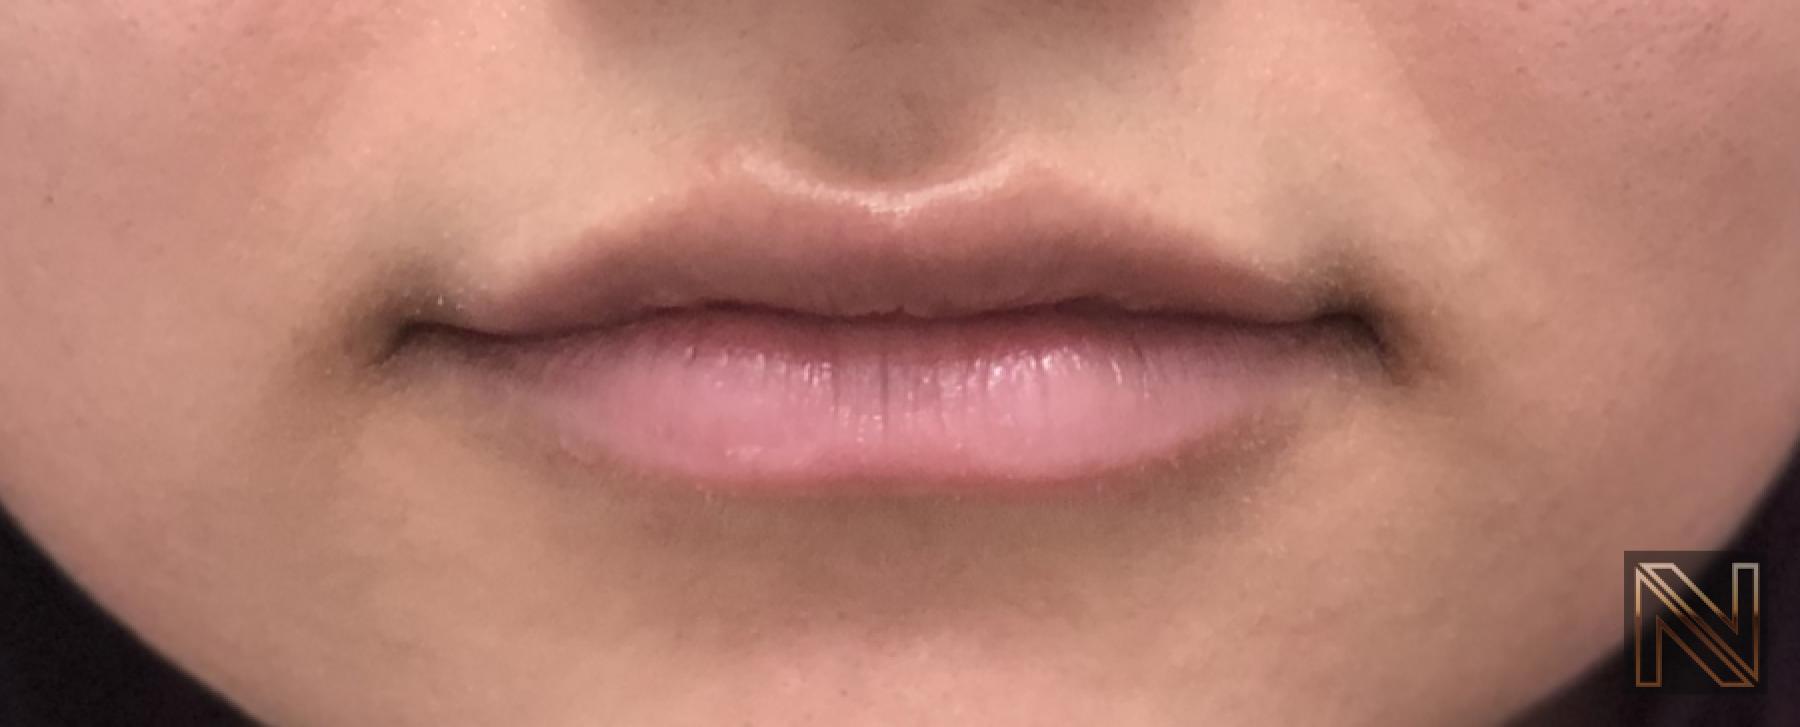 Fillers: Patient 8 - After 1